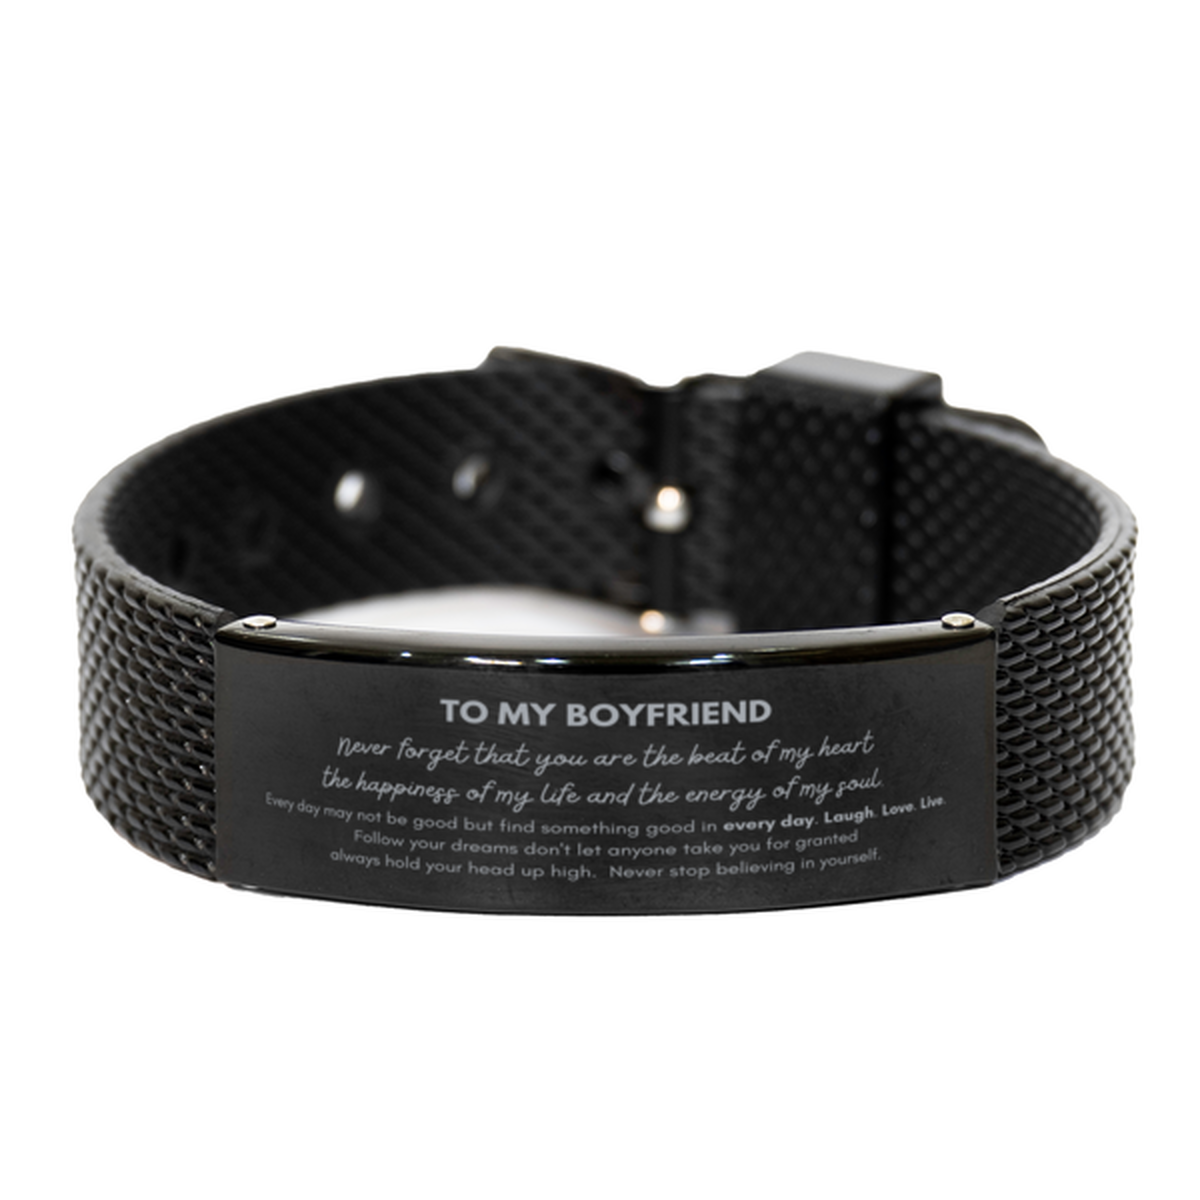 To My Boyfriend Bracelet Gifts, Christmas Boyfriend Black Shark Mesh Bracelet Present, Birthday Unique Motivational For Boyfriend, To My Boyfriend Never forget that you are the beat of my heart the happiness of my life and the energy of my soul